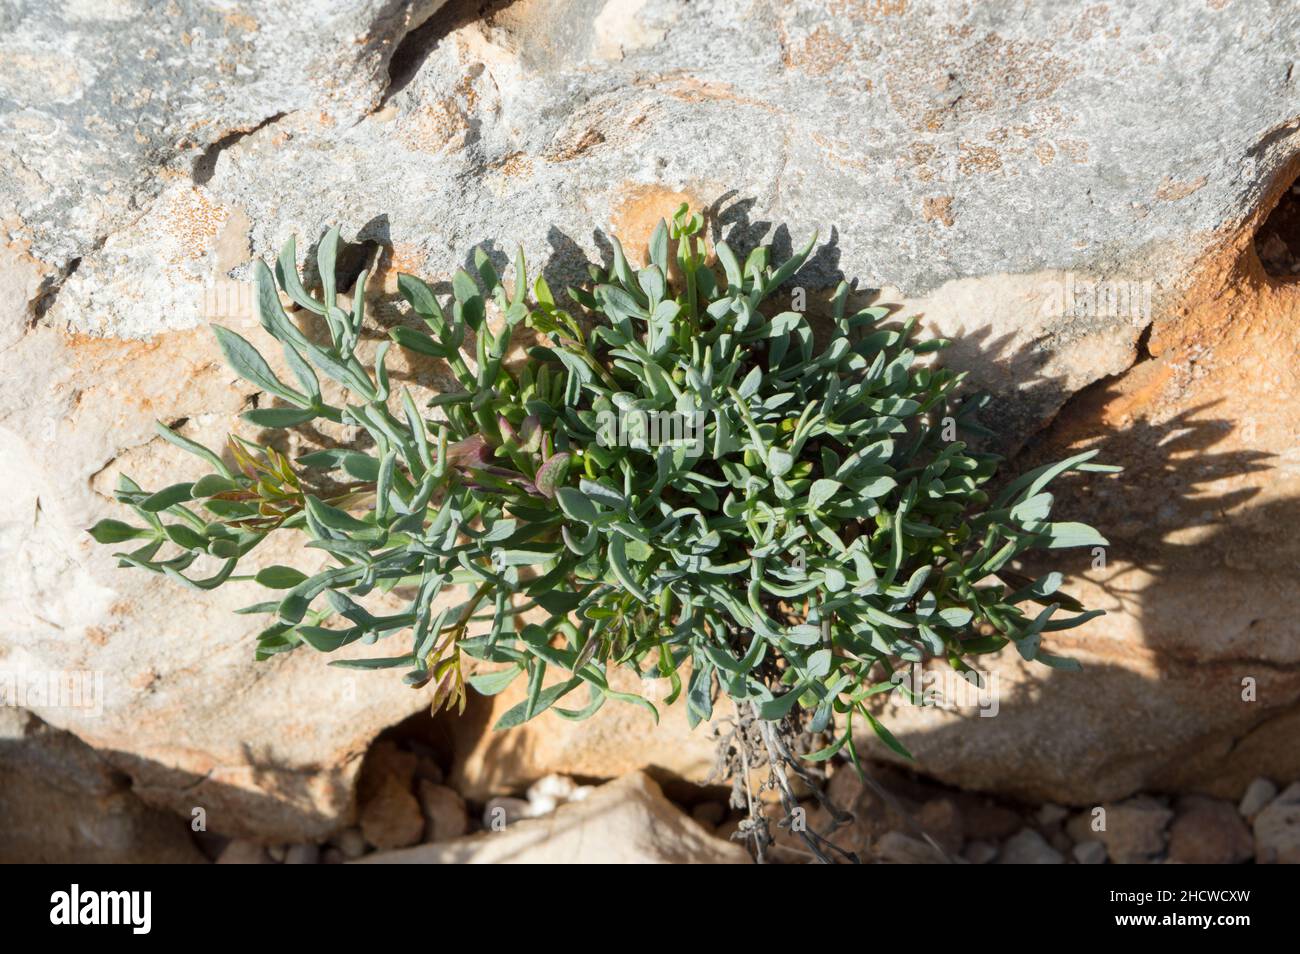 Rock samphire or sea fennel plant, Crithmum maritimum, edible coastal plant with green aromatic leaves, growing on the rock by the sea, in Croatia Stock Photo